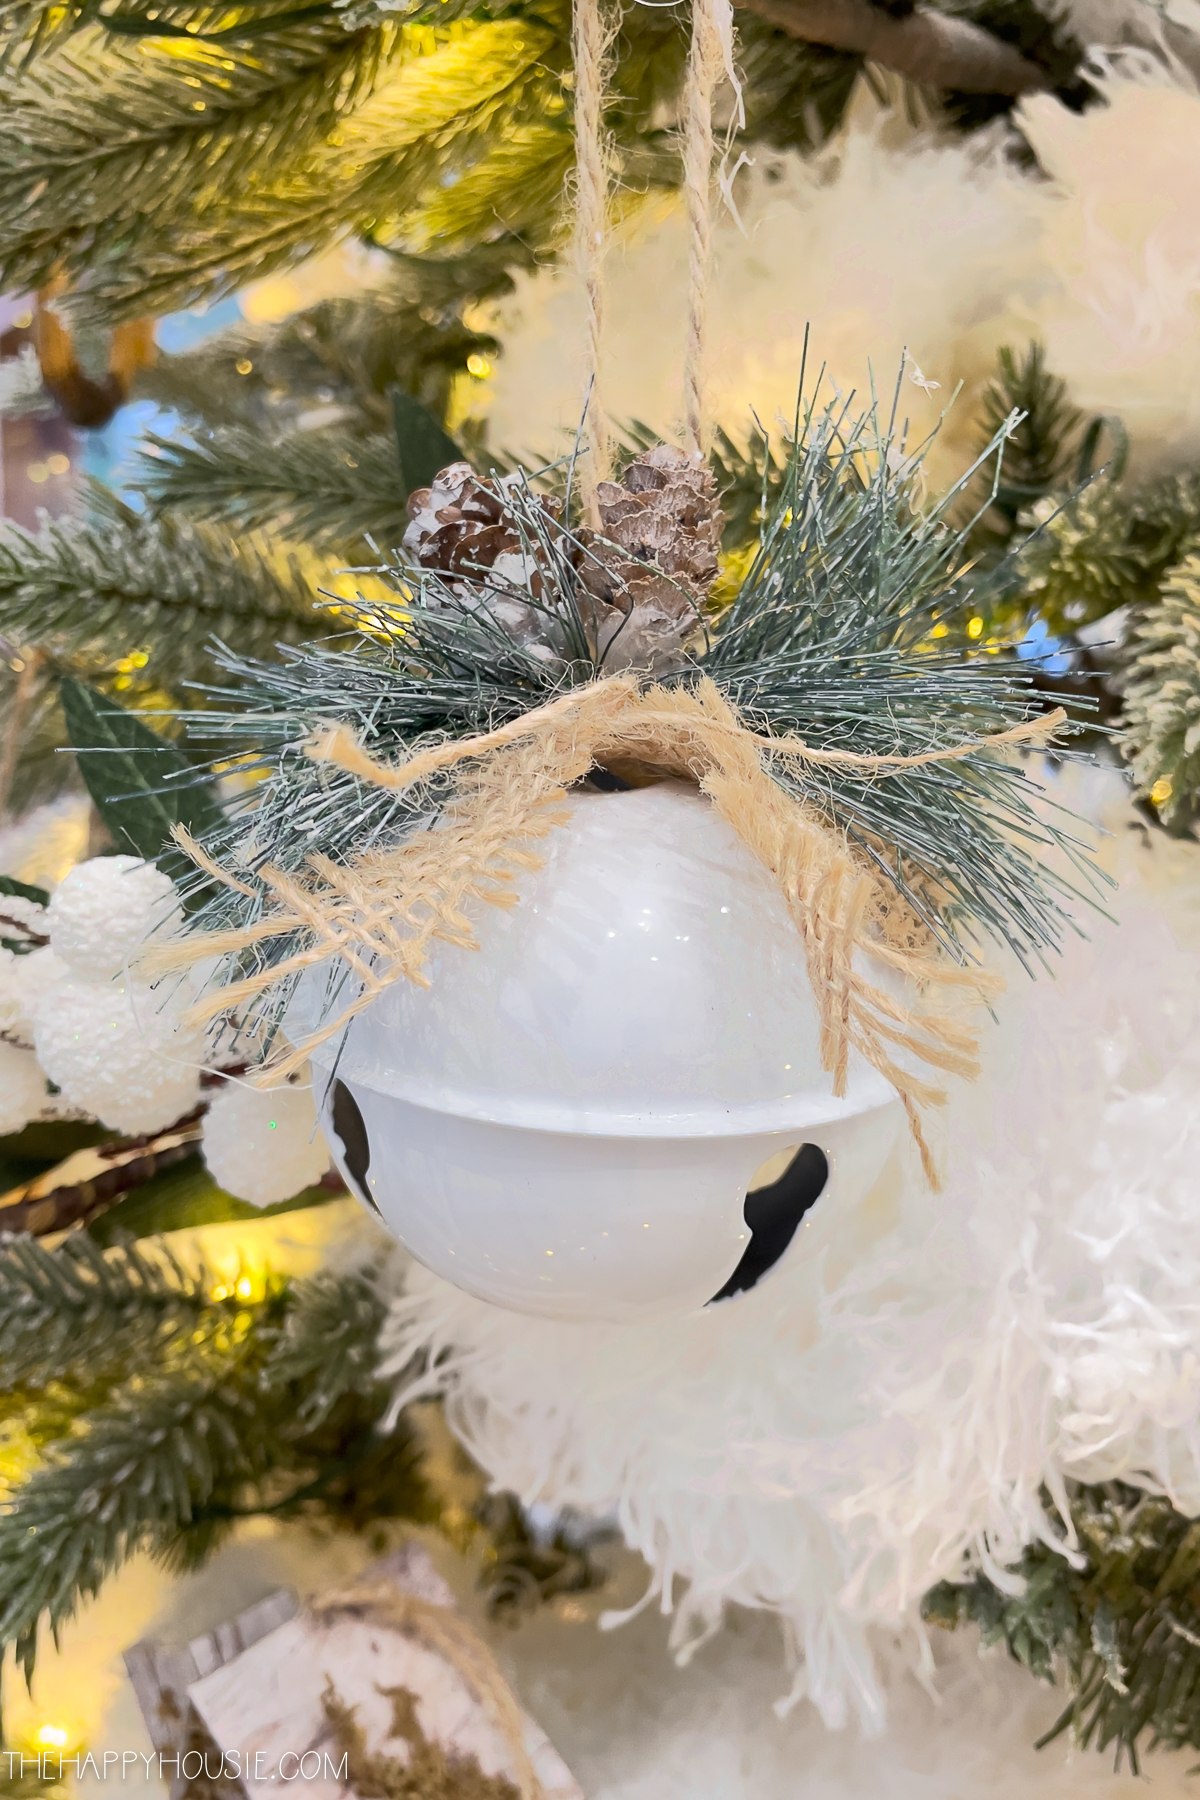 A white Christmas ball on the tree.